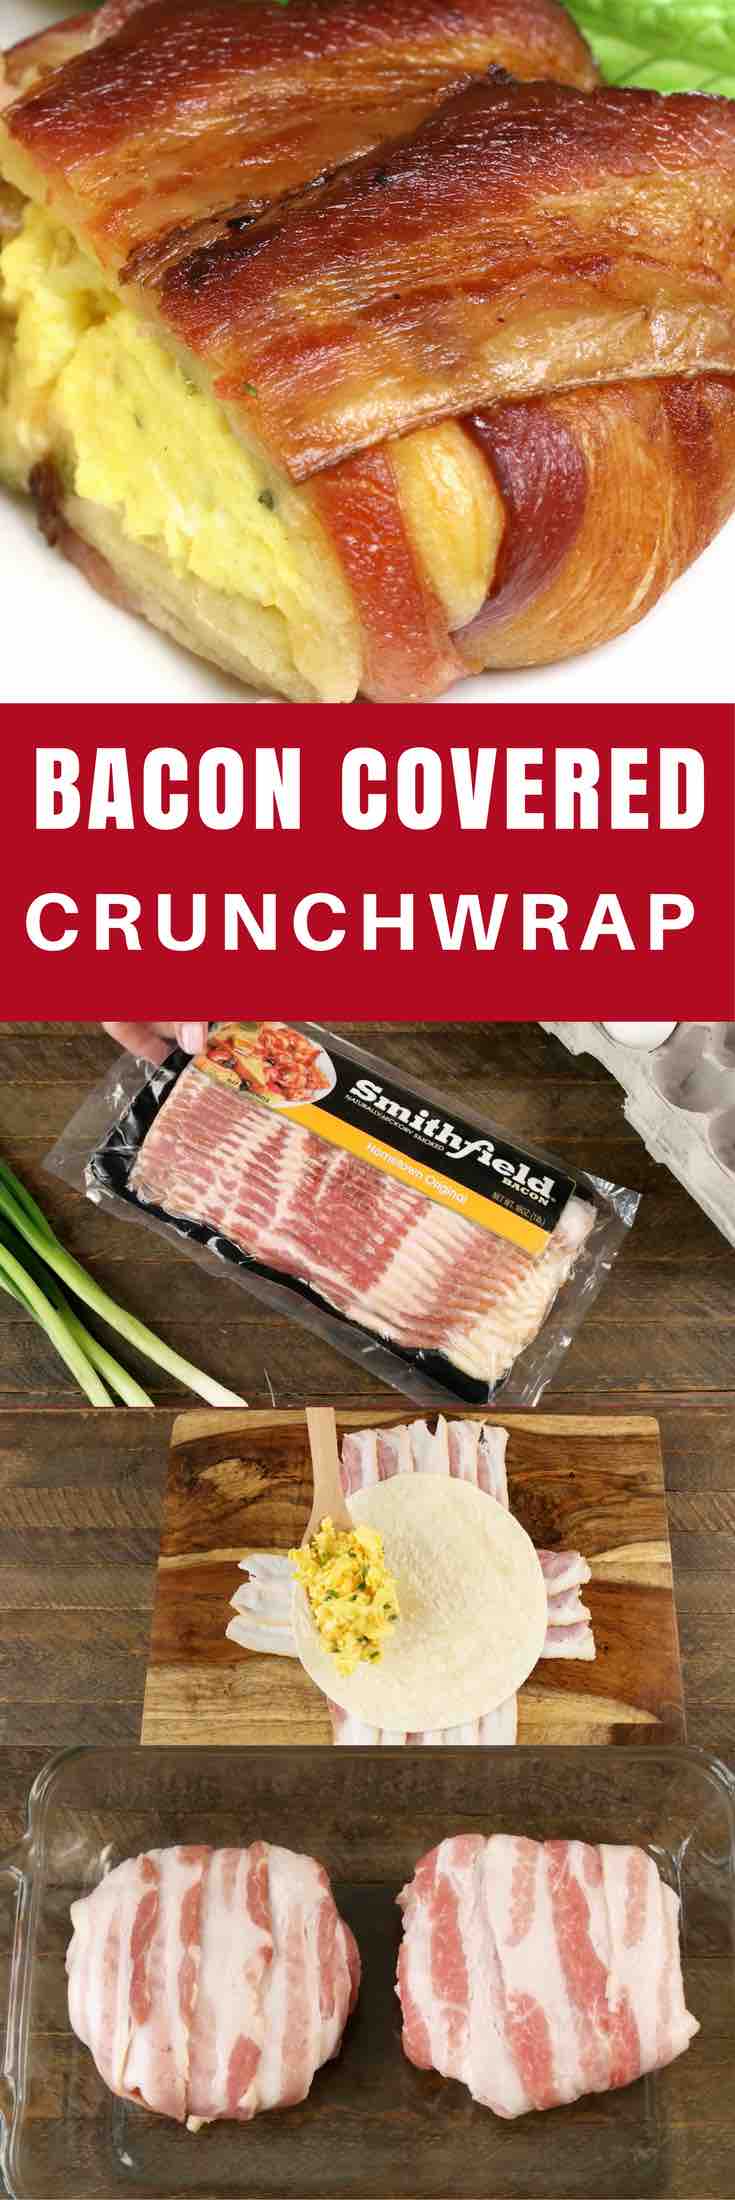 Bacon Covered Crunchwraps – A quick and easy meal with loaded scrambled egg crunchwraps and wrapped with bacon. Only a few ingredients needed for this delicious recipe: Smithfield bacon, eggs, cheddar cheese, flour tortilla, green onions, salt and pepper. This recipe makes a great breakfast, brunch, lunch, or a snack! SmithfieldBrunch AD.